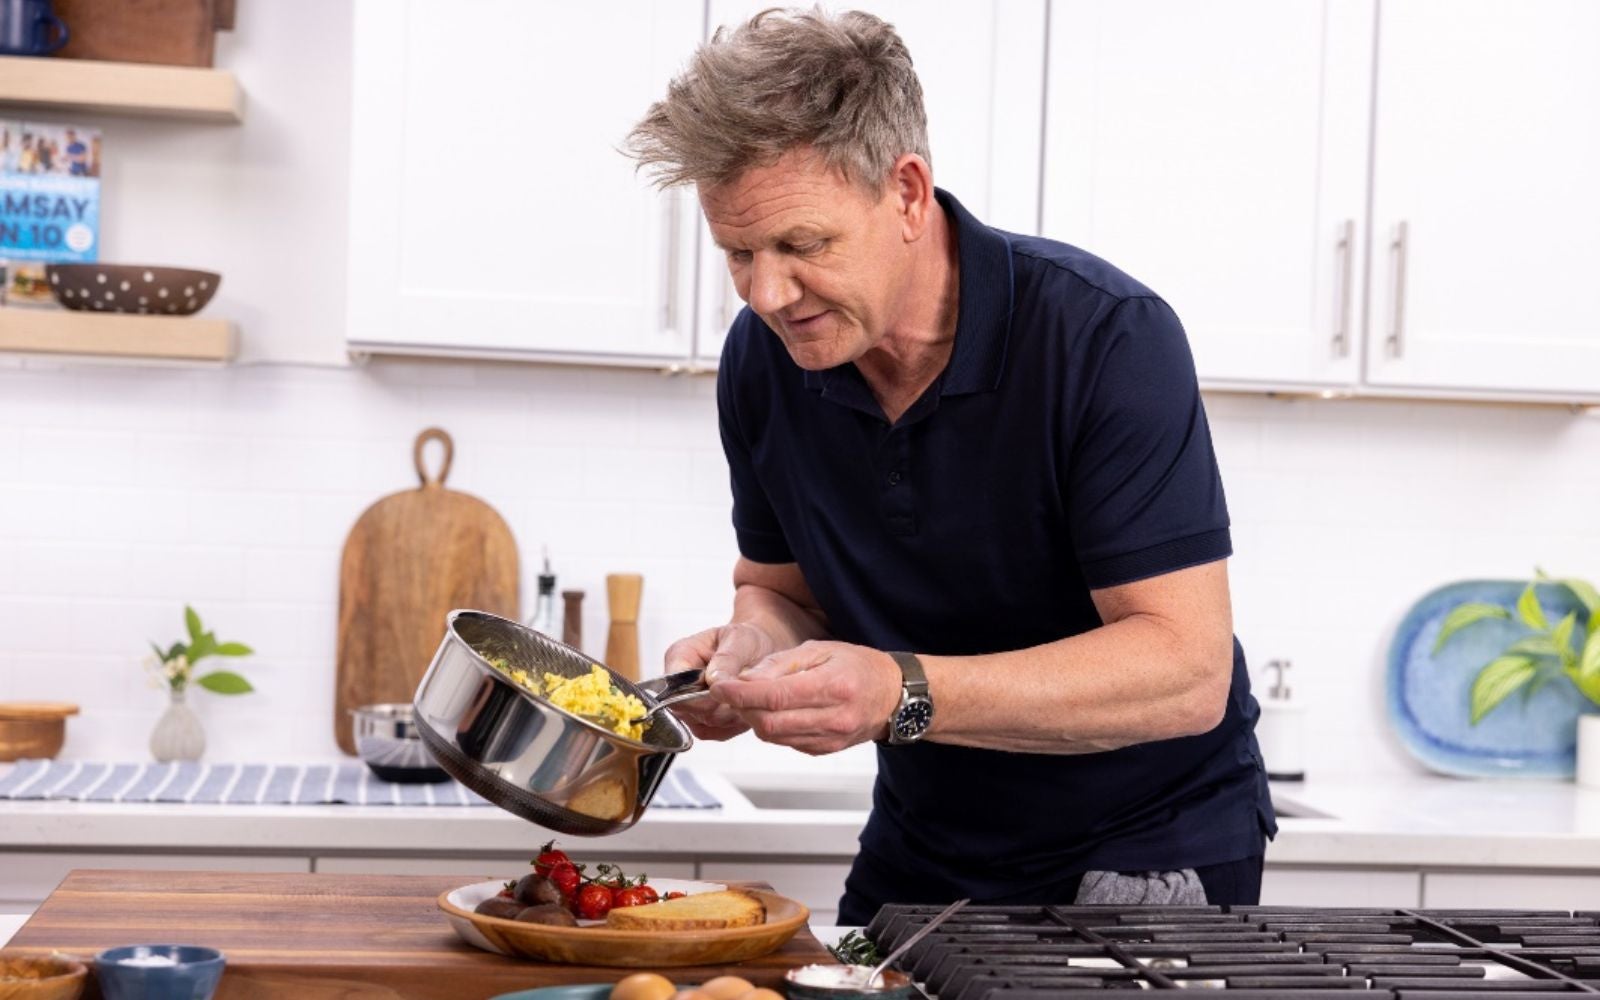 Gordon Ramsay's Favorite HexClad Cookware Is On Sale — up to 30